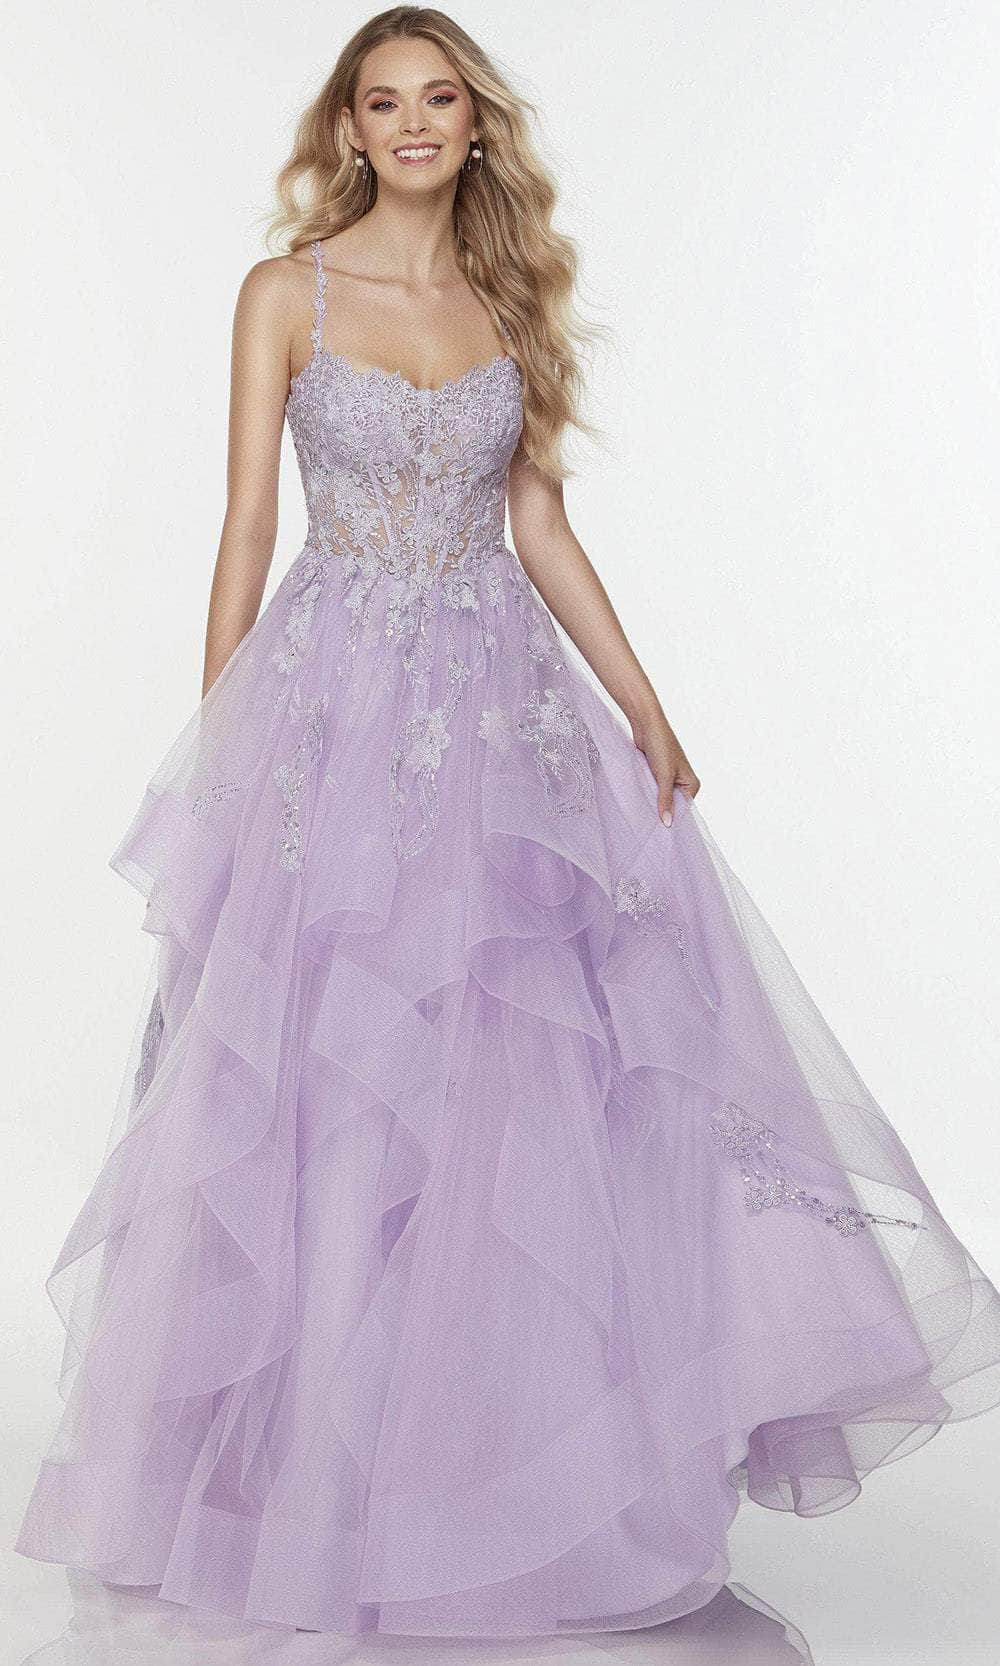 Image of Alyce Paris 61094 - Embroidered Sweetheart Prom Ballgown